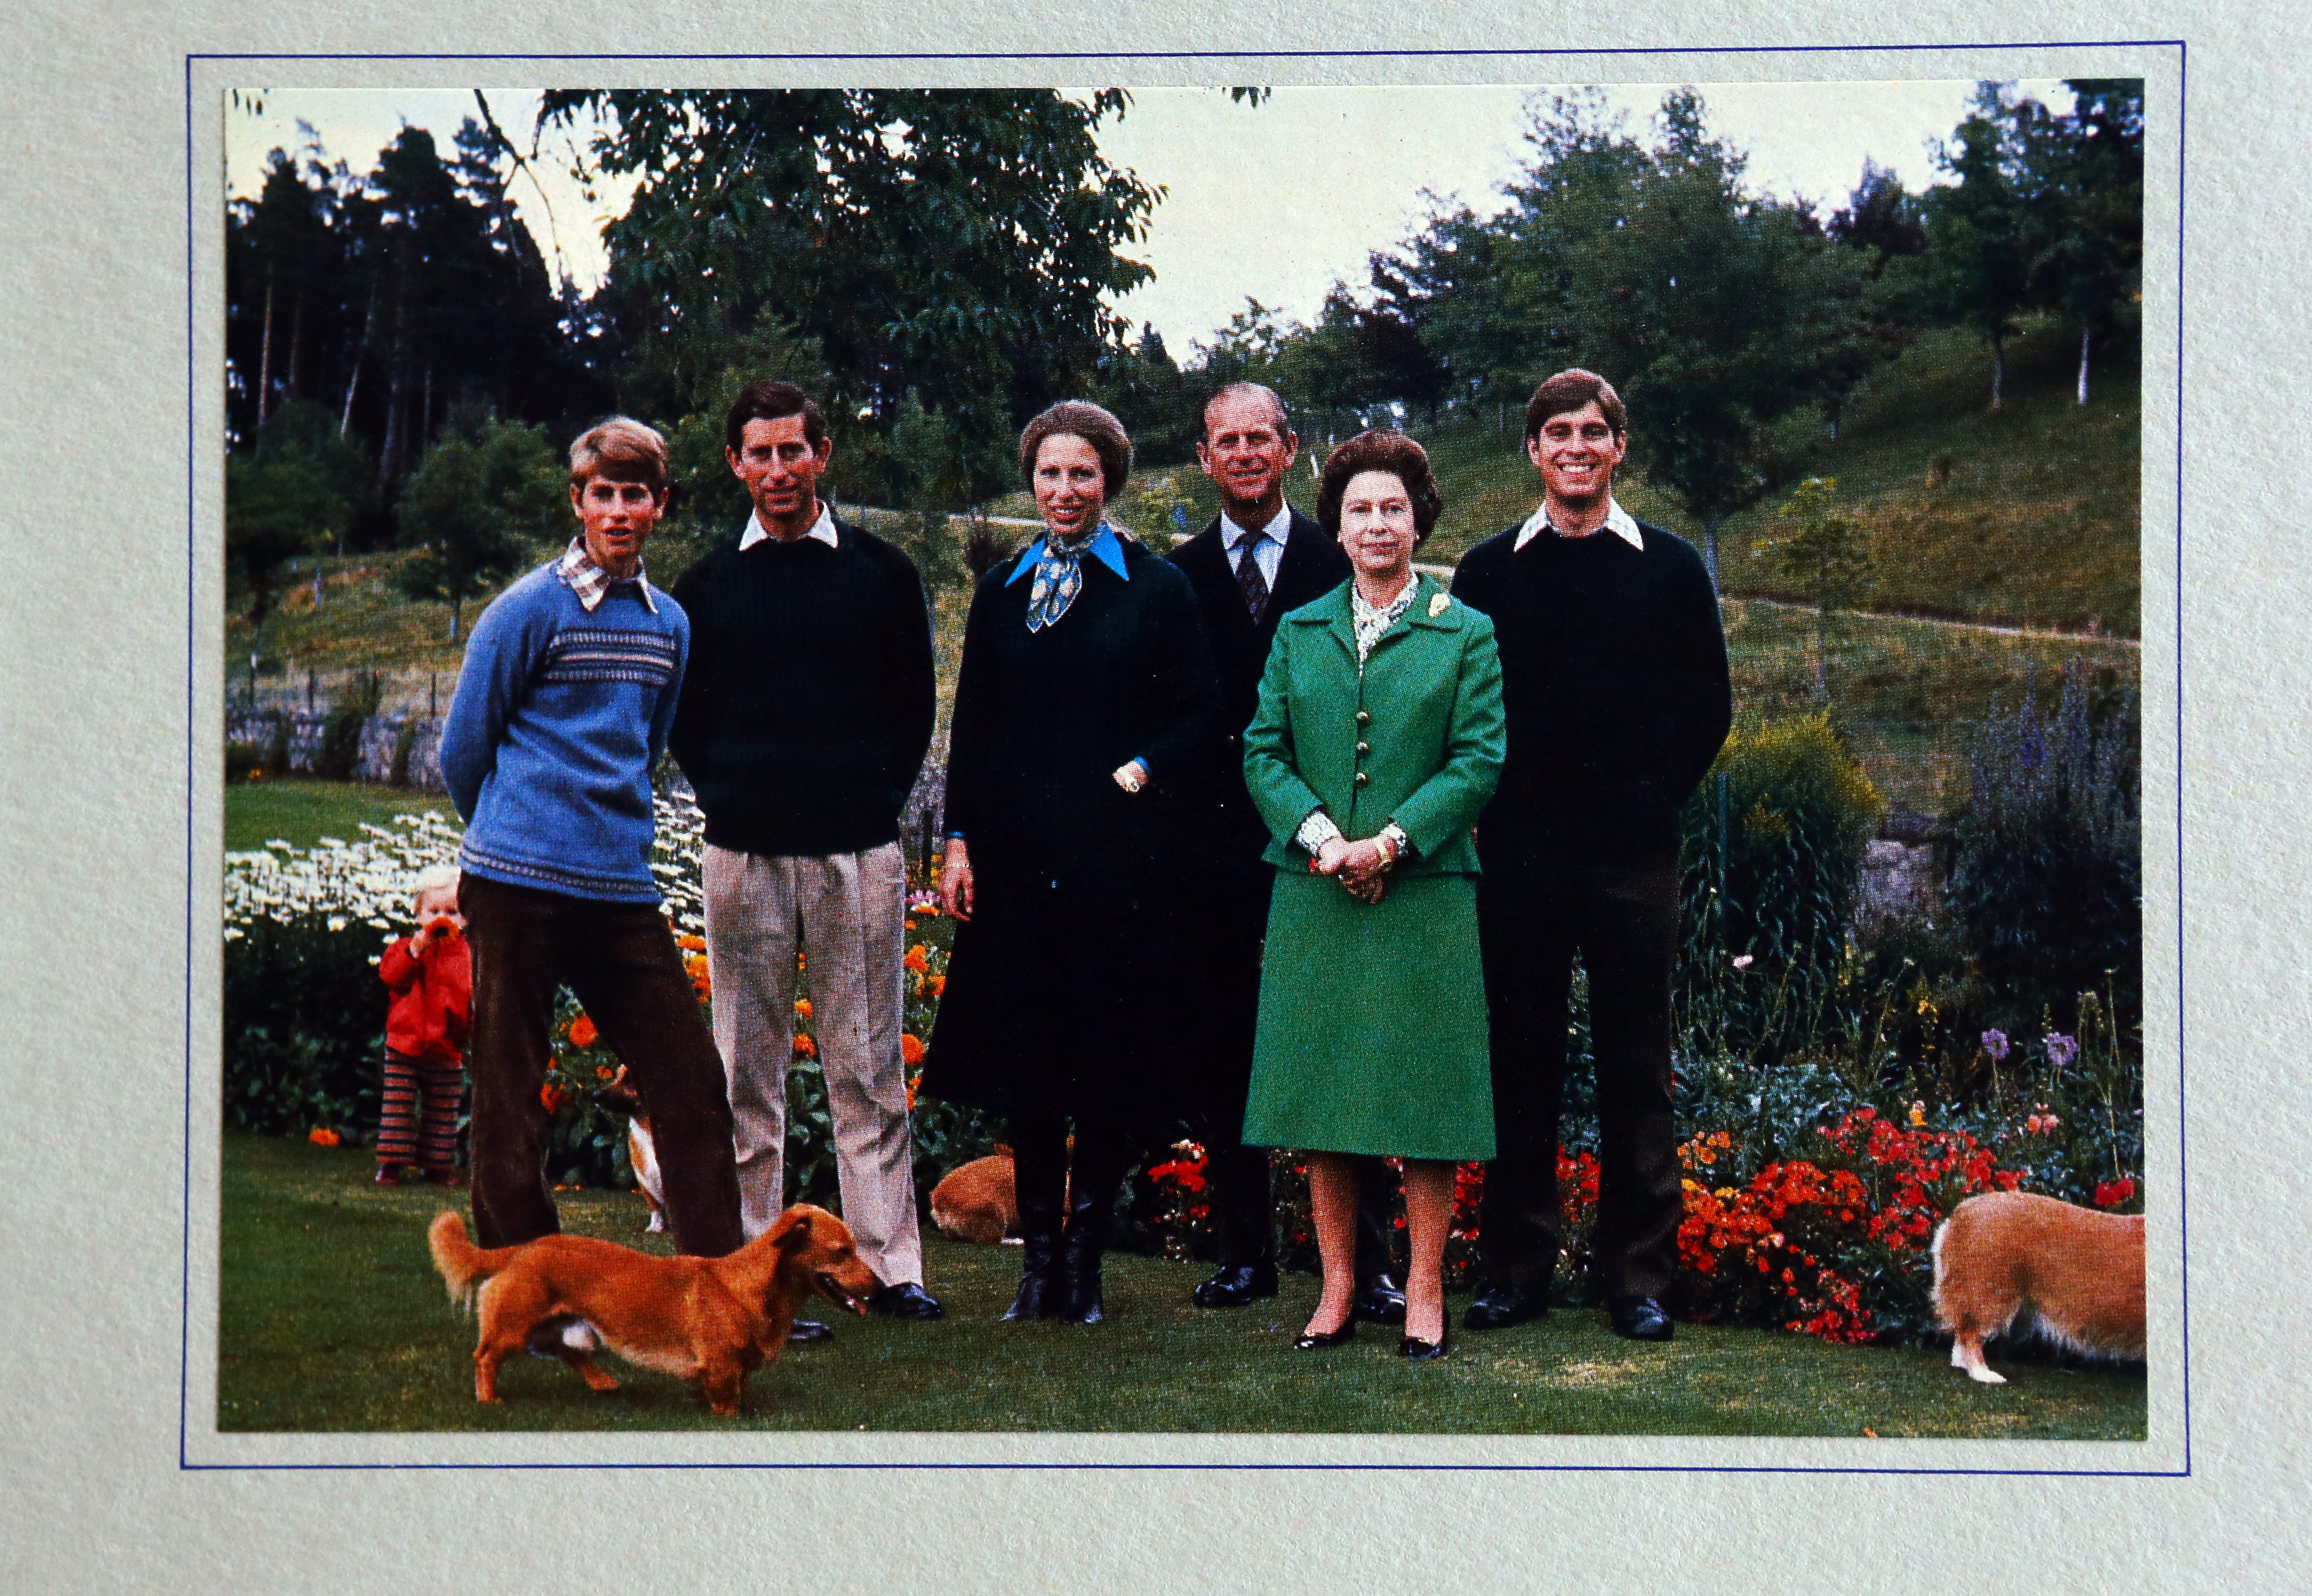 1979 Royal Christmas Card.  Queen Elizabeth II and Philip, Duke of Edinburgh with their children, from left to right, Prince Edward, Prince Charles, Princess Anne and Prince Andrew.  Princess Anne's son, Peter Phillips, can be seen on the left, behind Prince Edward.